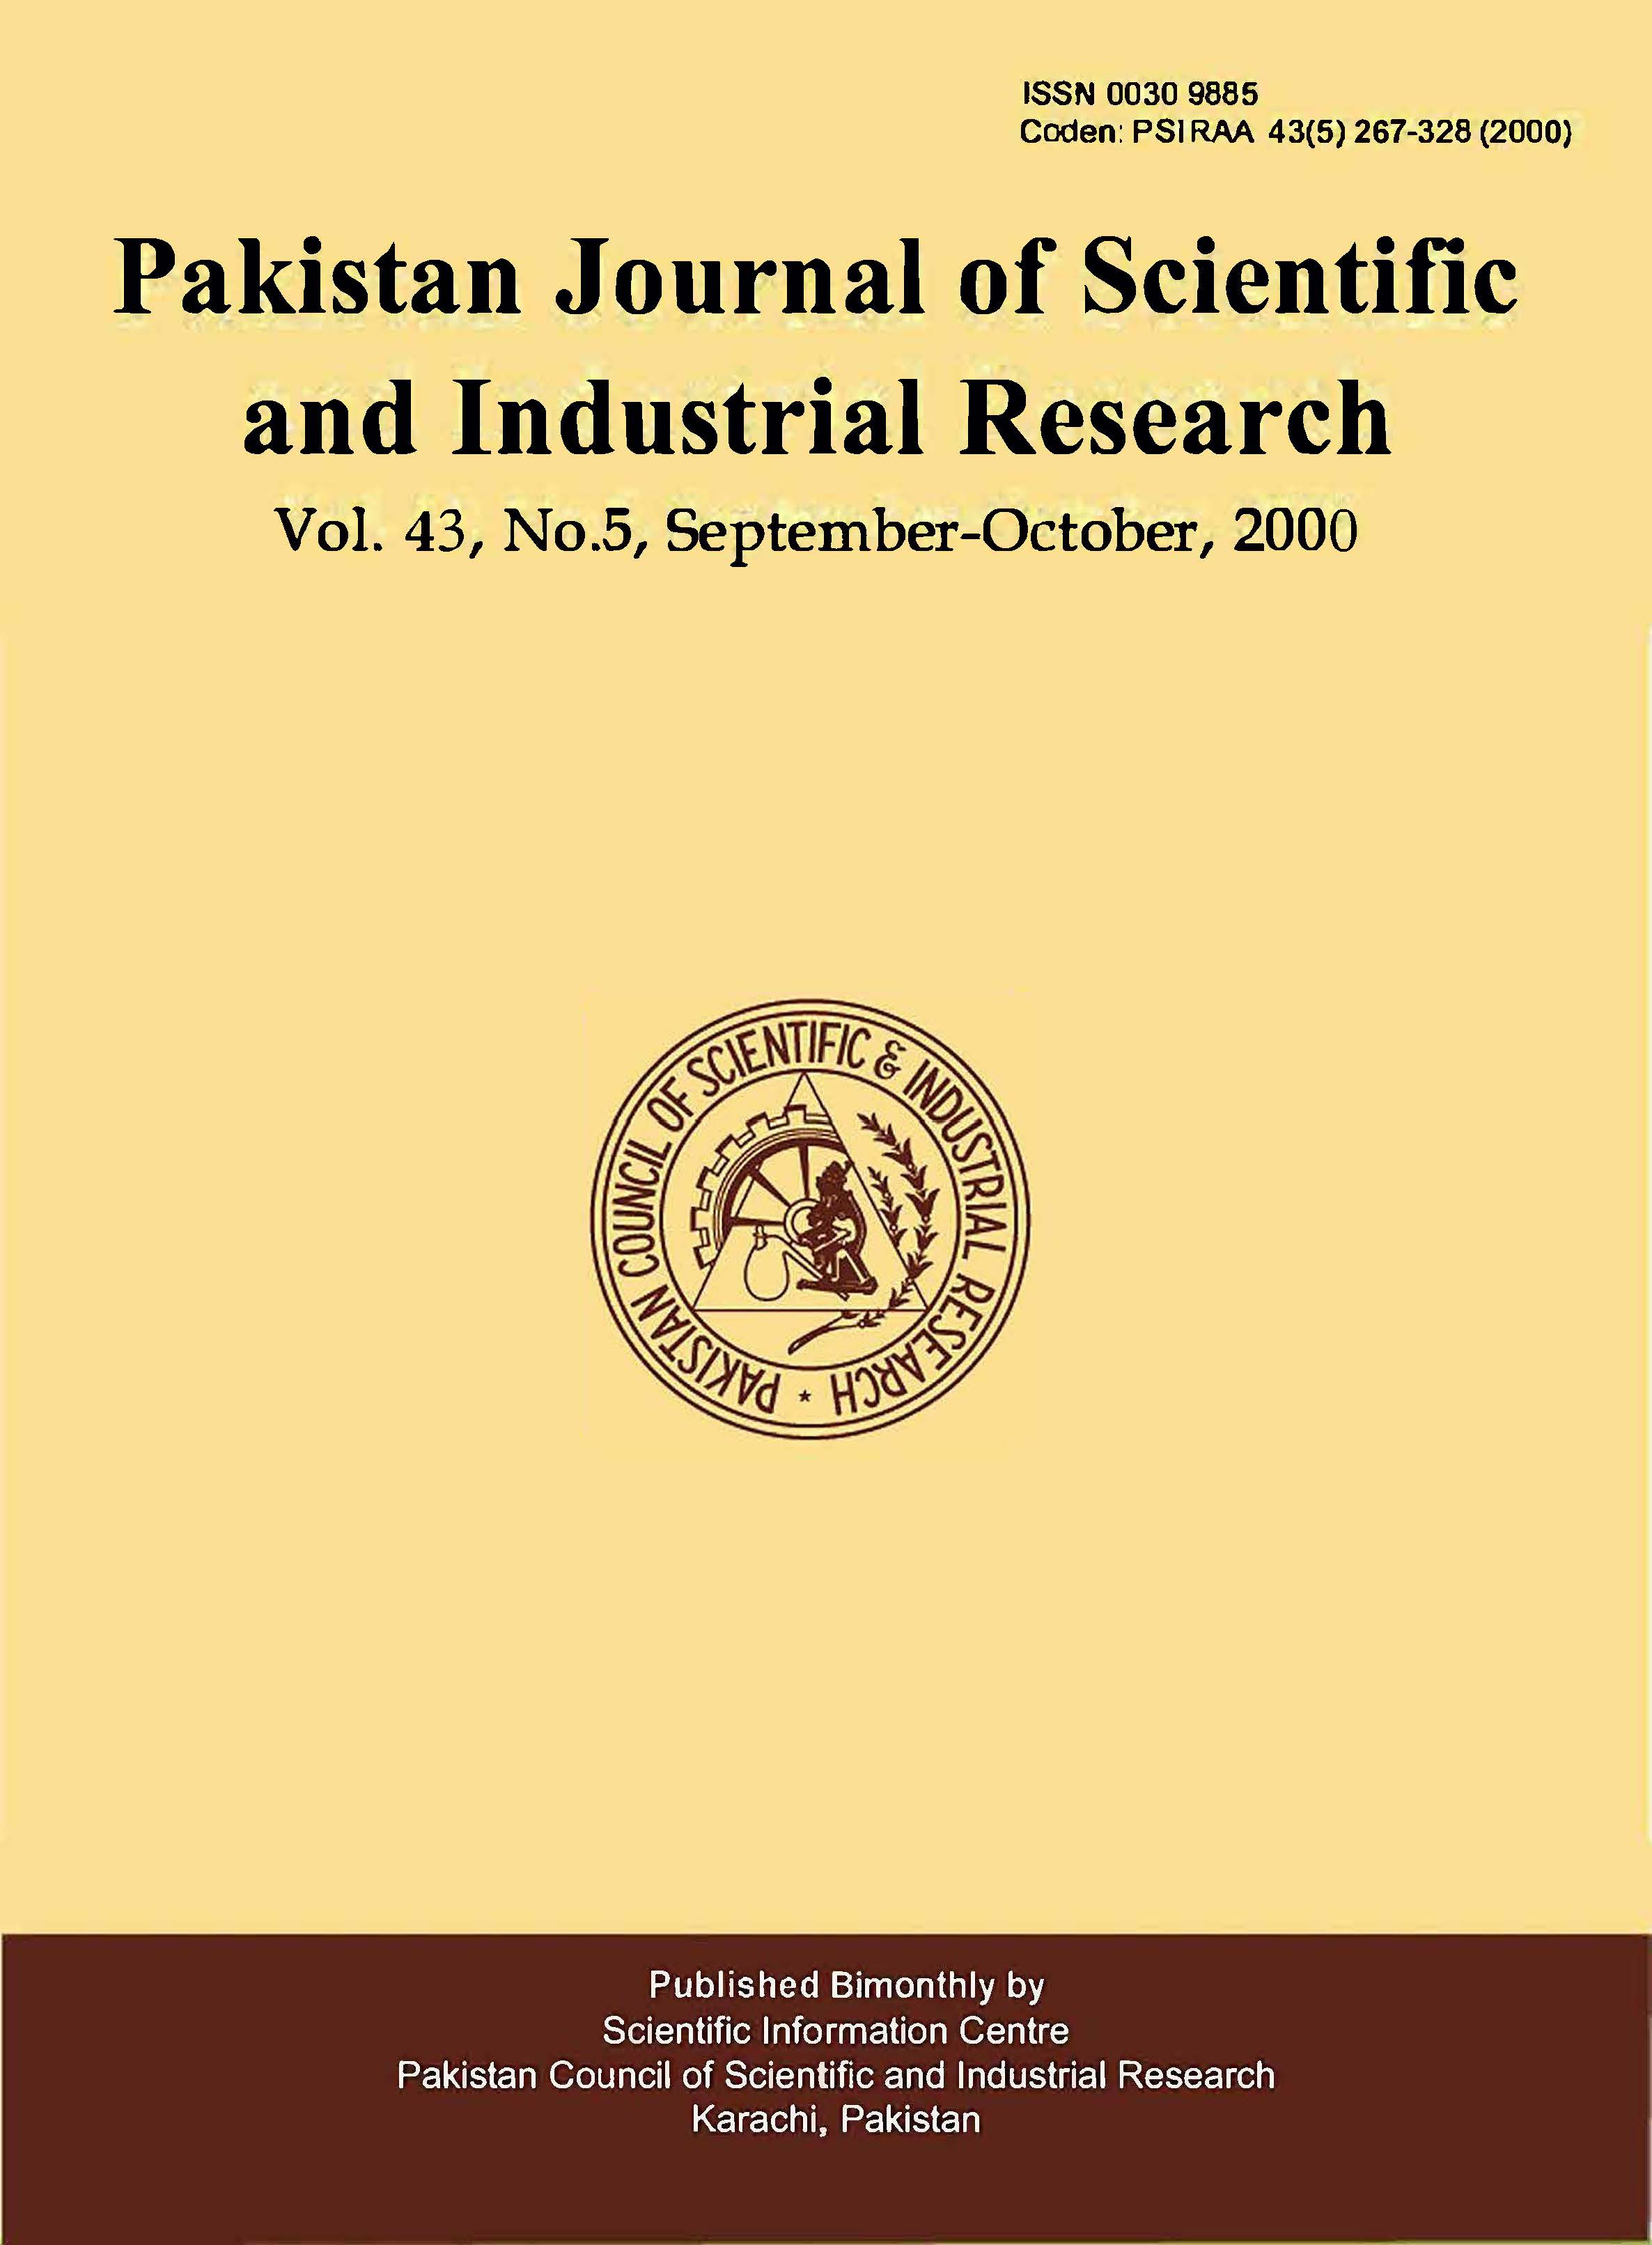 					View Vol. 43 No. 4 (2000): Pakistan Journal of Scientific and Industrial Research
				